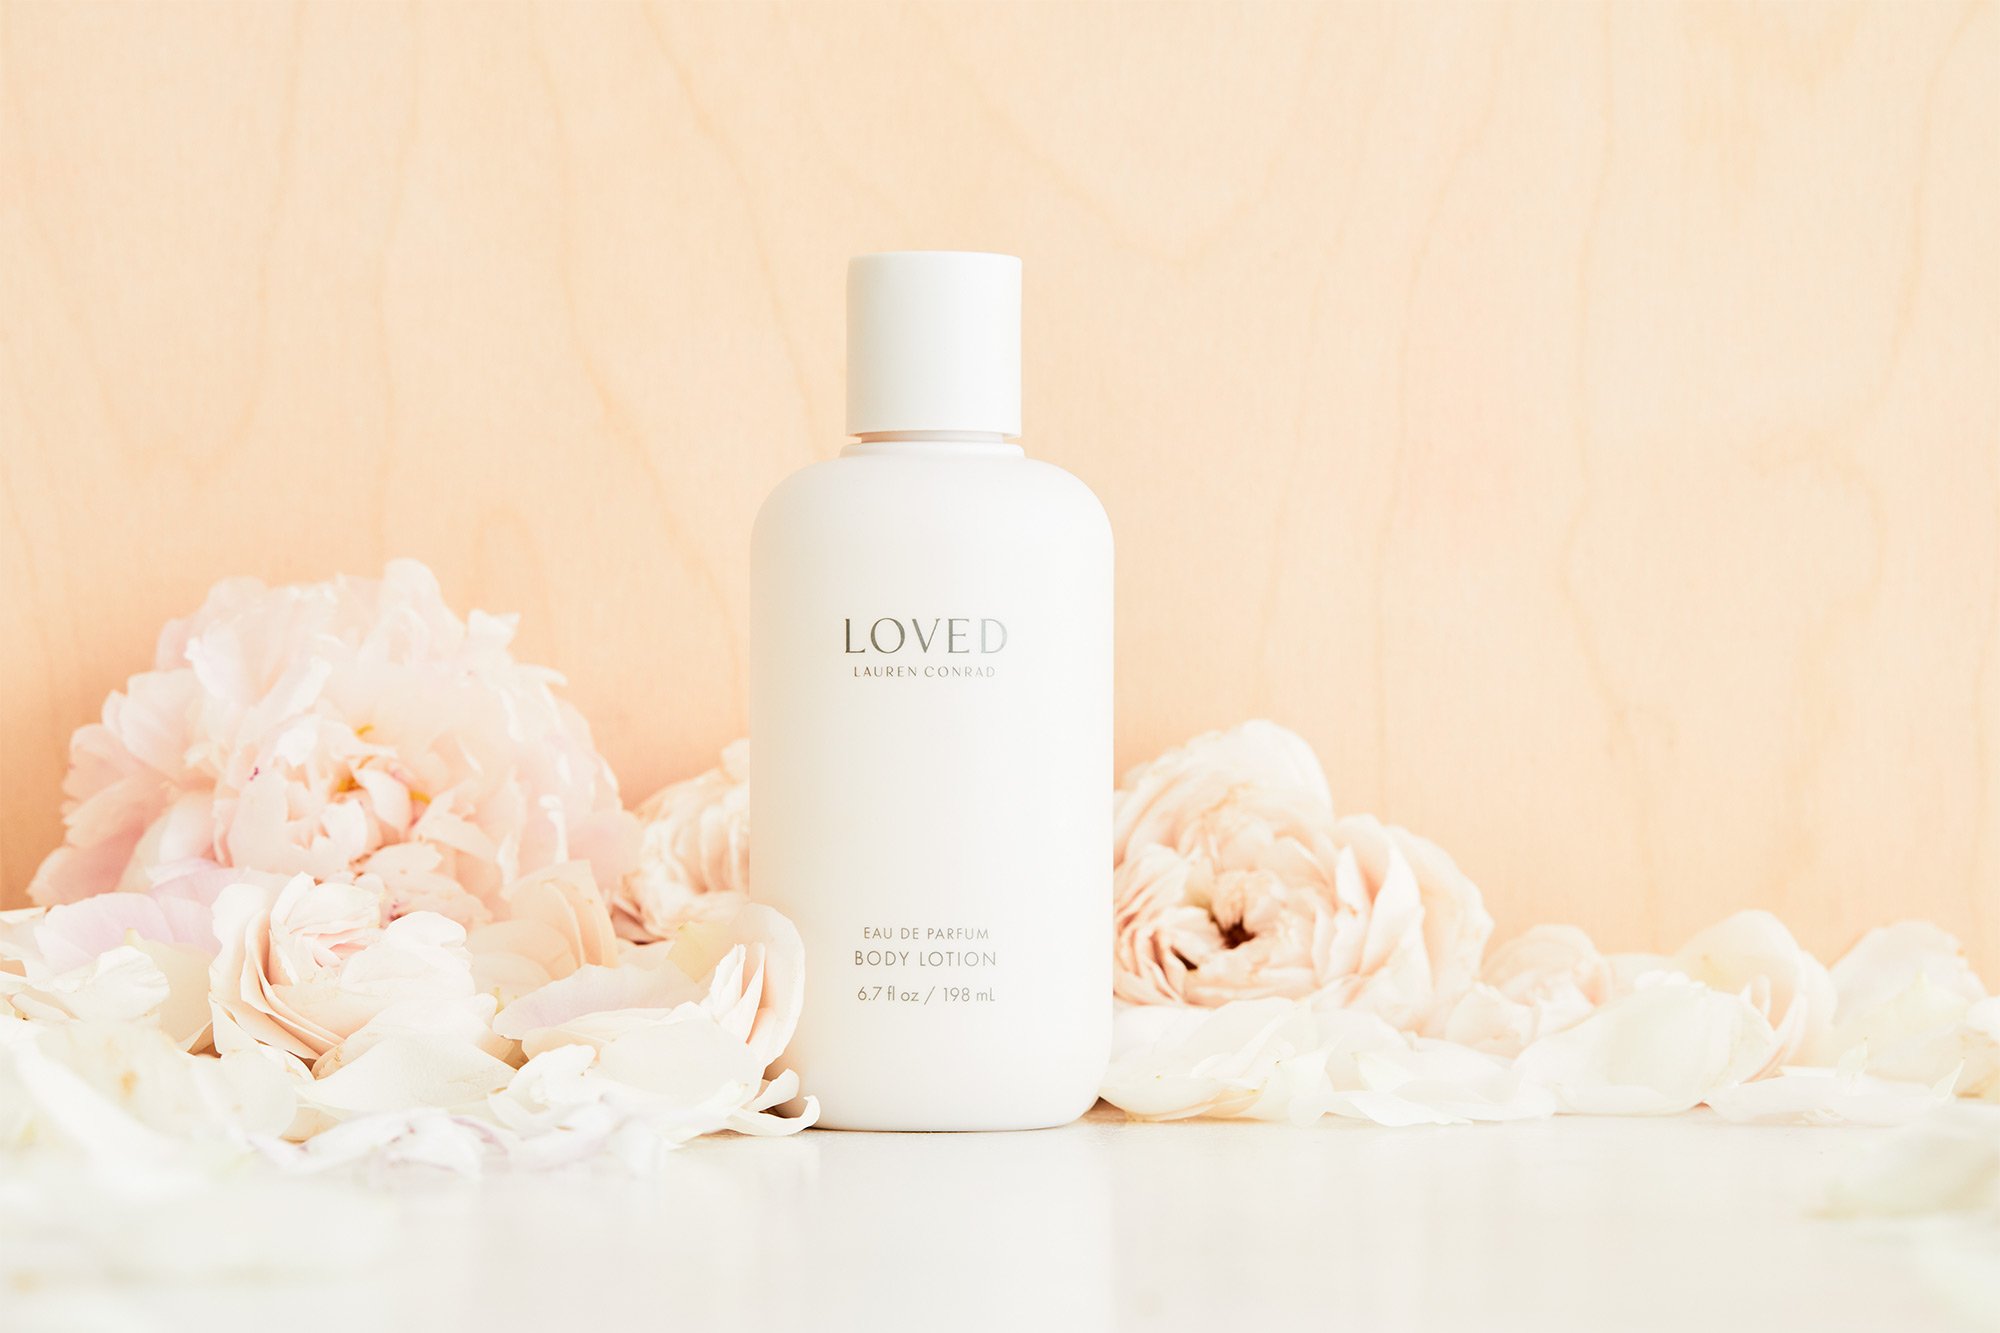 Introducing My First Fragrance, LOVED by Lauren Conrad